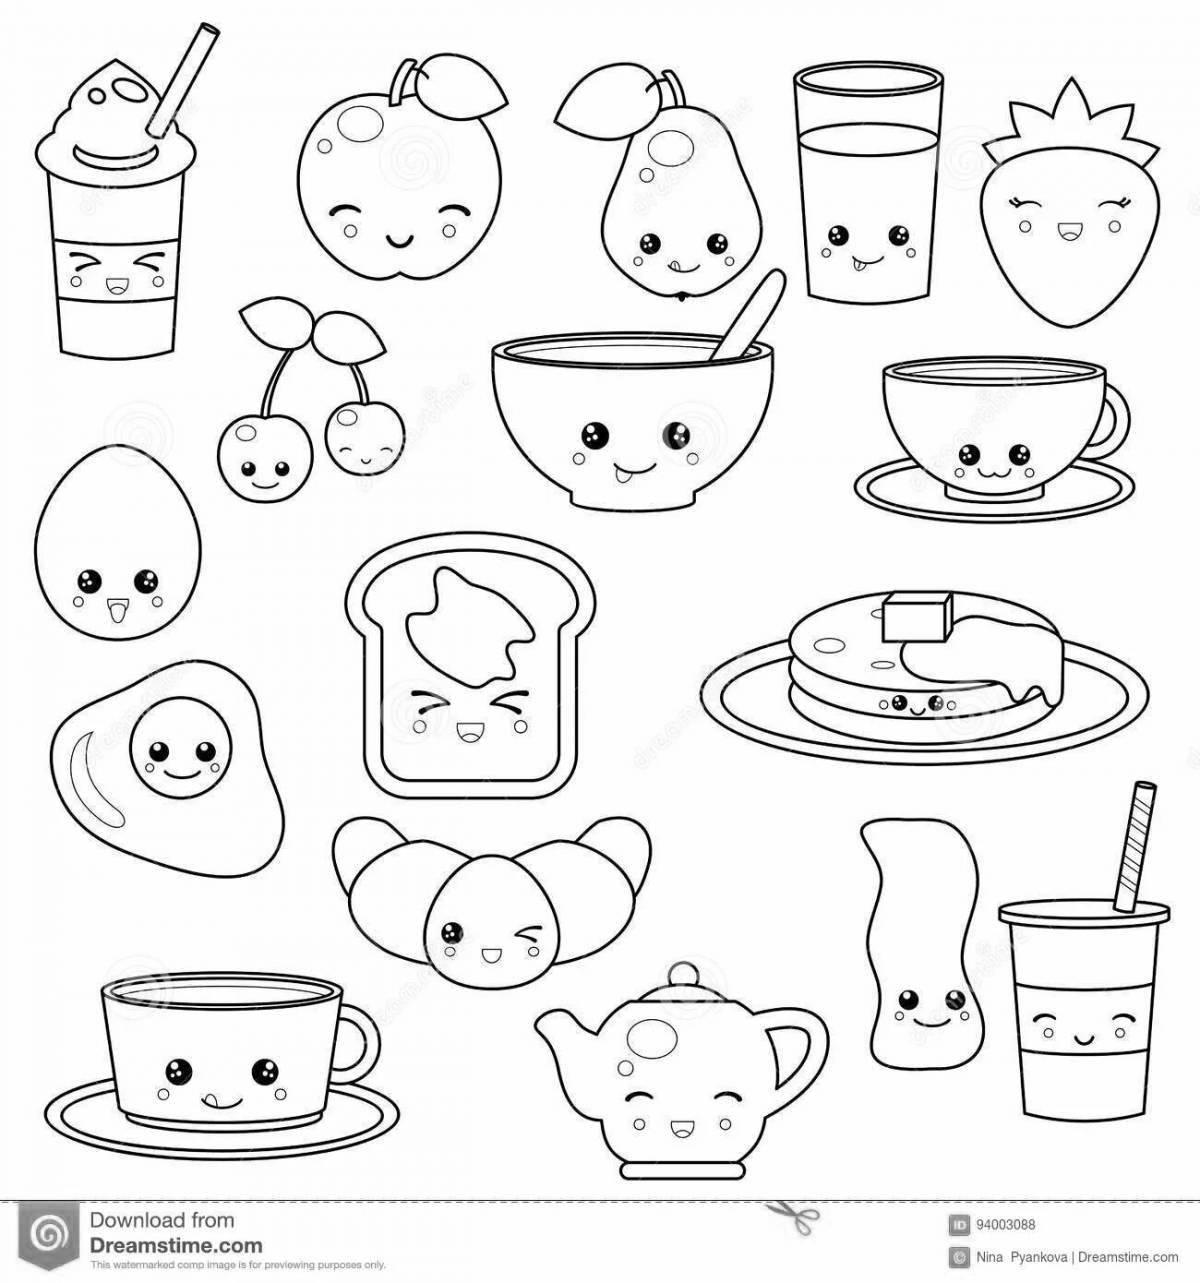 Adorable food stickers coloring pages